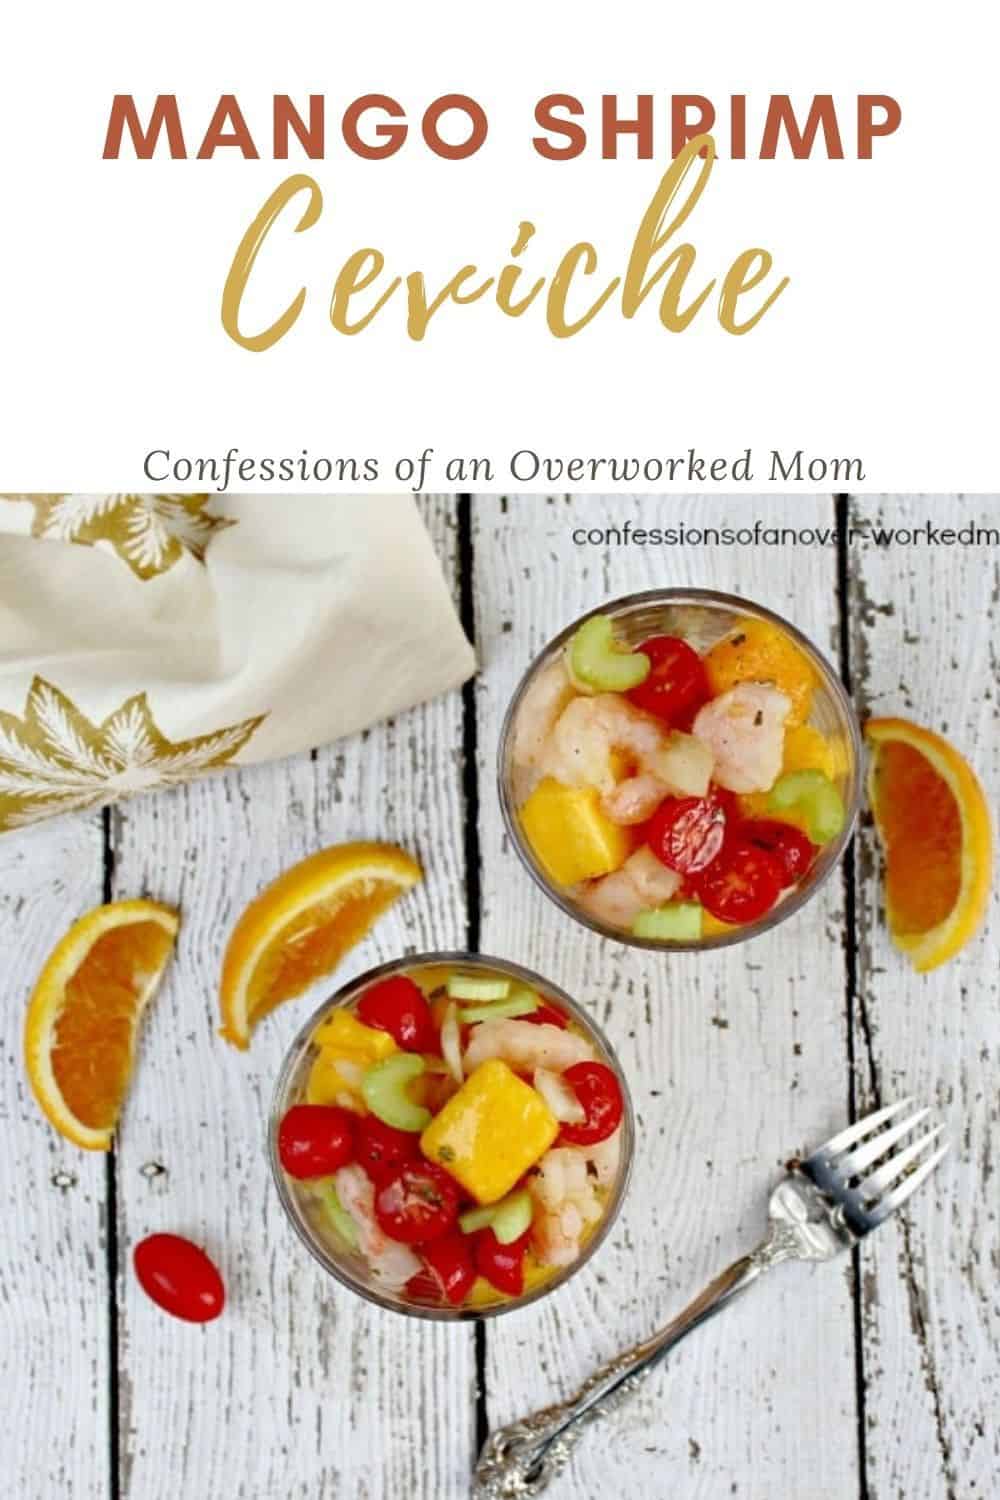 This mango shrimp ceviche recipe is a perfect holiday appetizer. Try this delicious shrimp ceviche with mango for your next party.